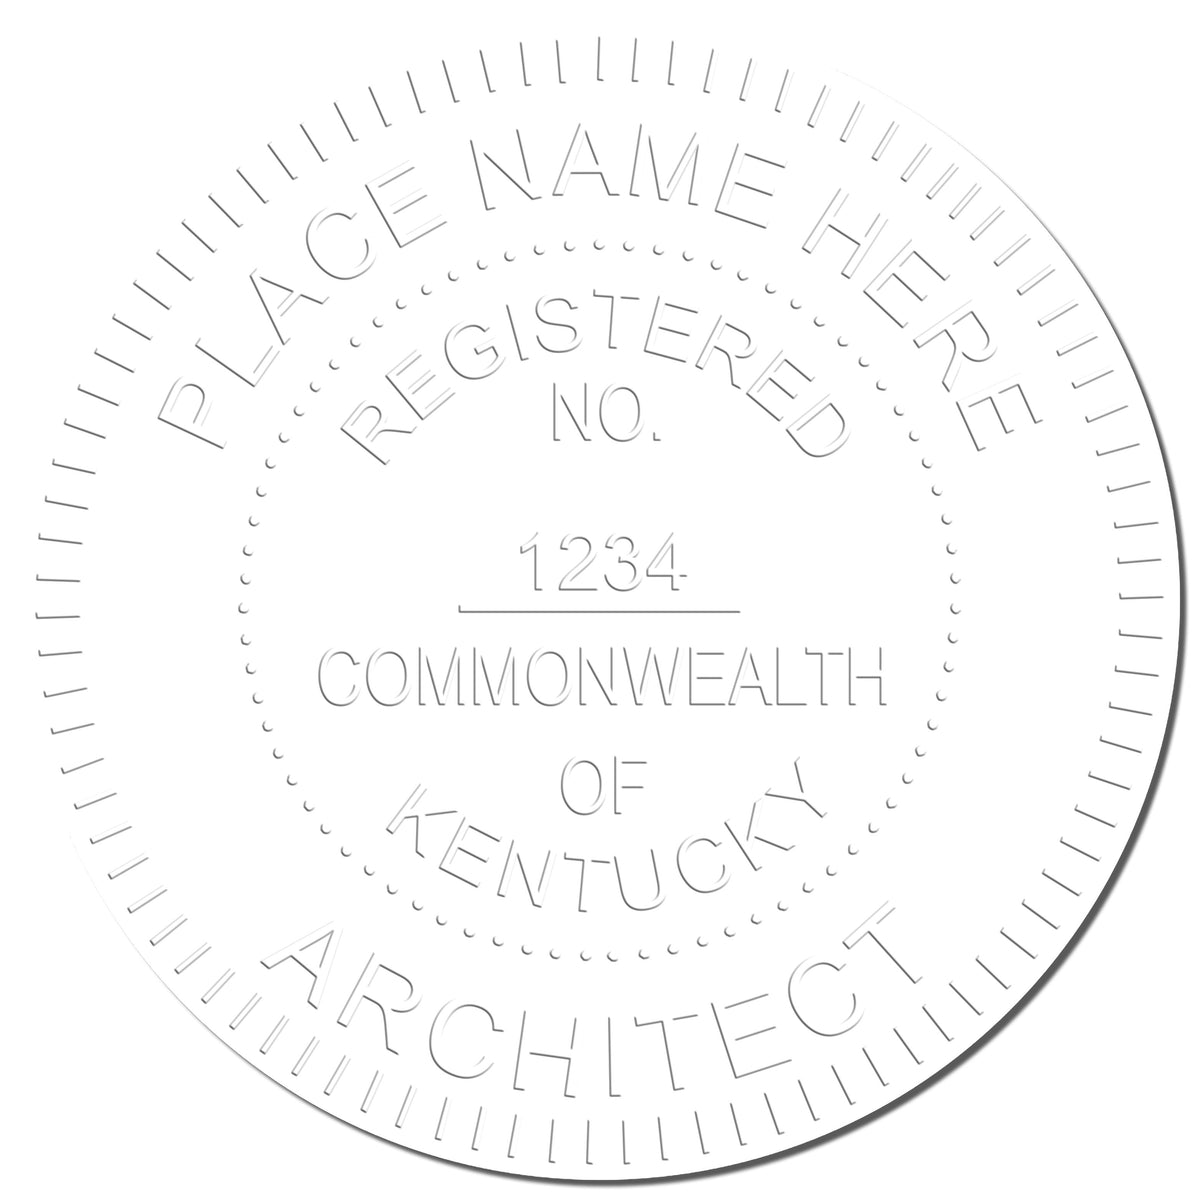 This paper is stamped with a sample imprint of the Hybrid Kentucky Architect Seal, signifying its quality and reliability.